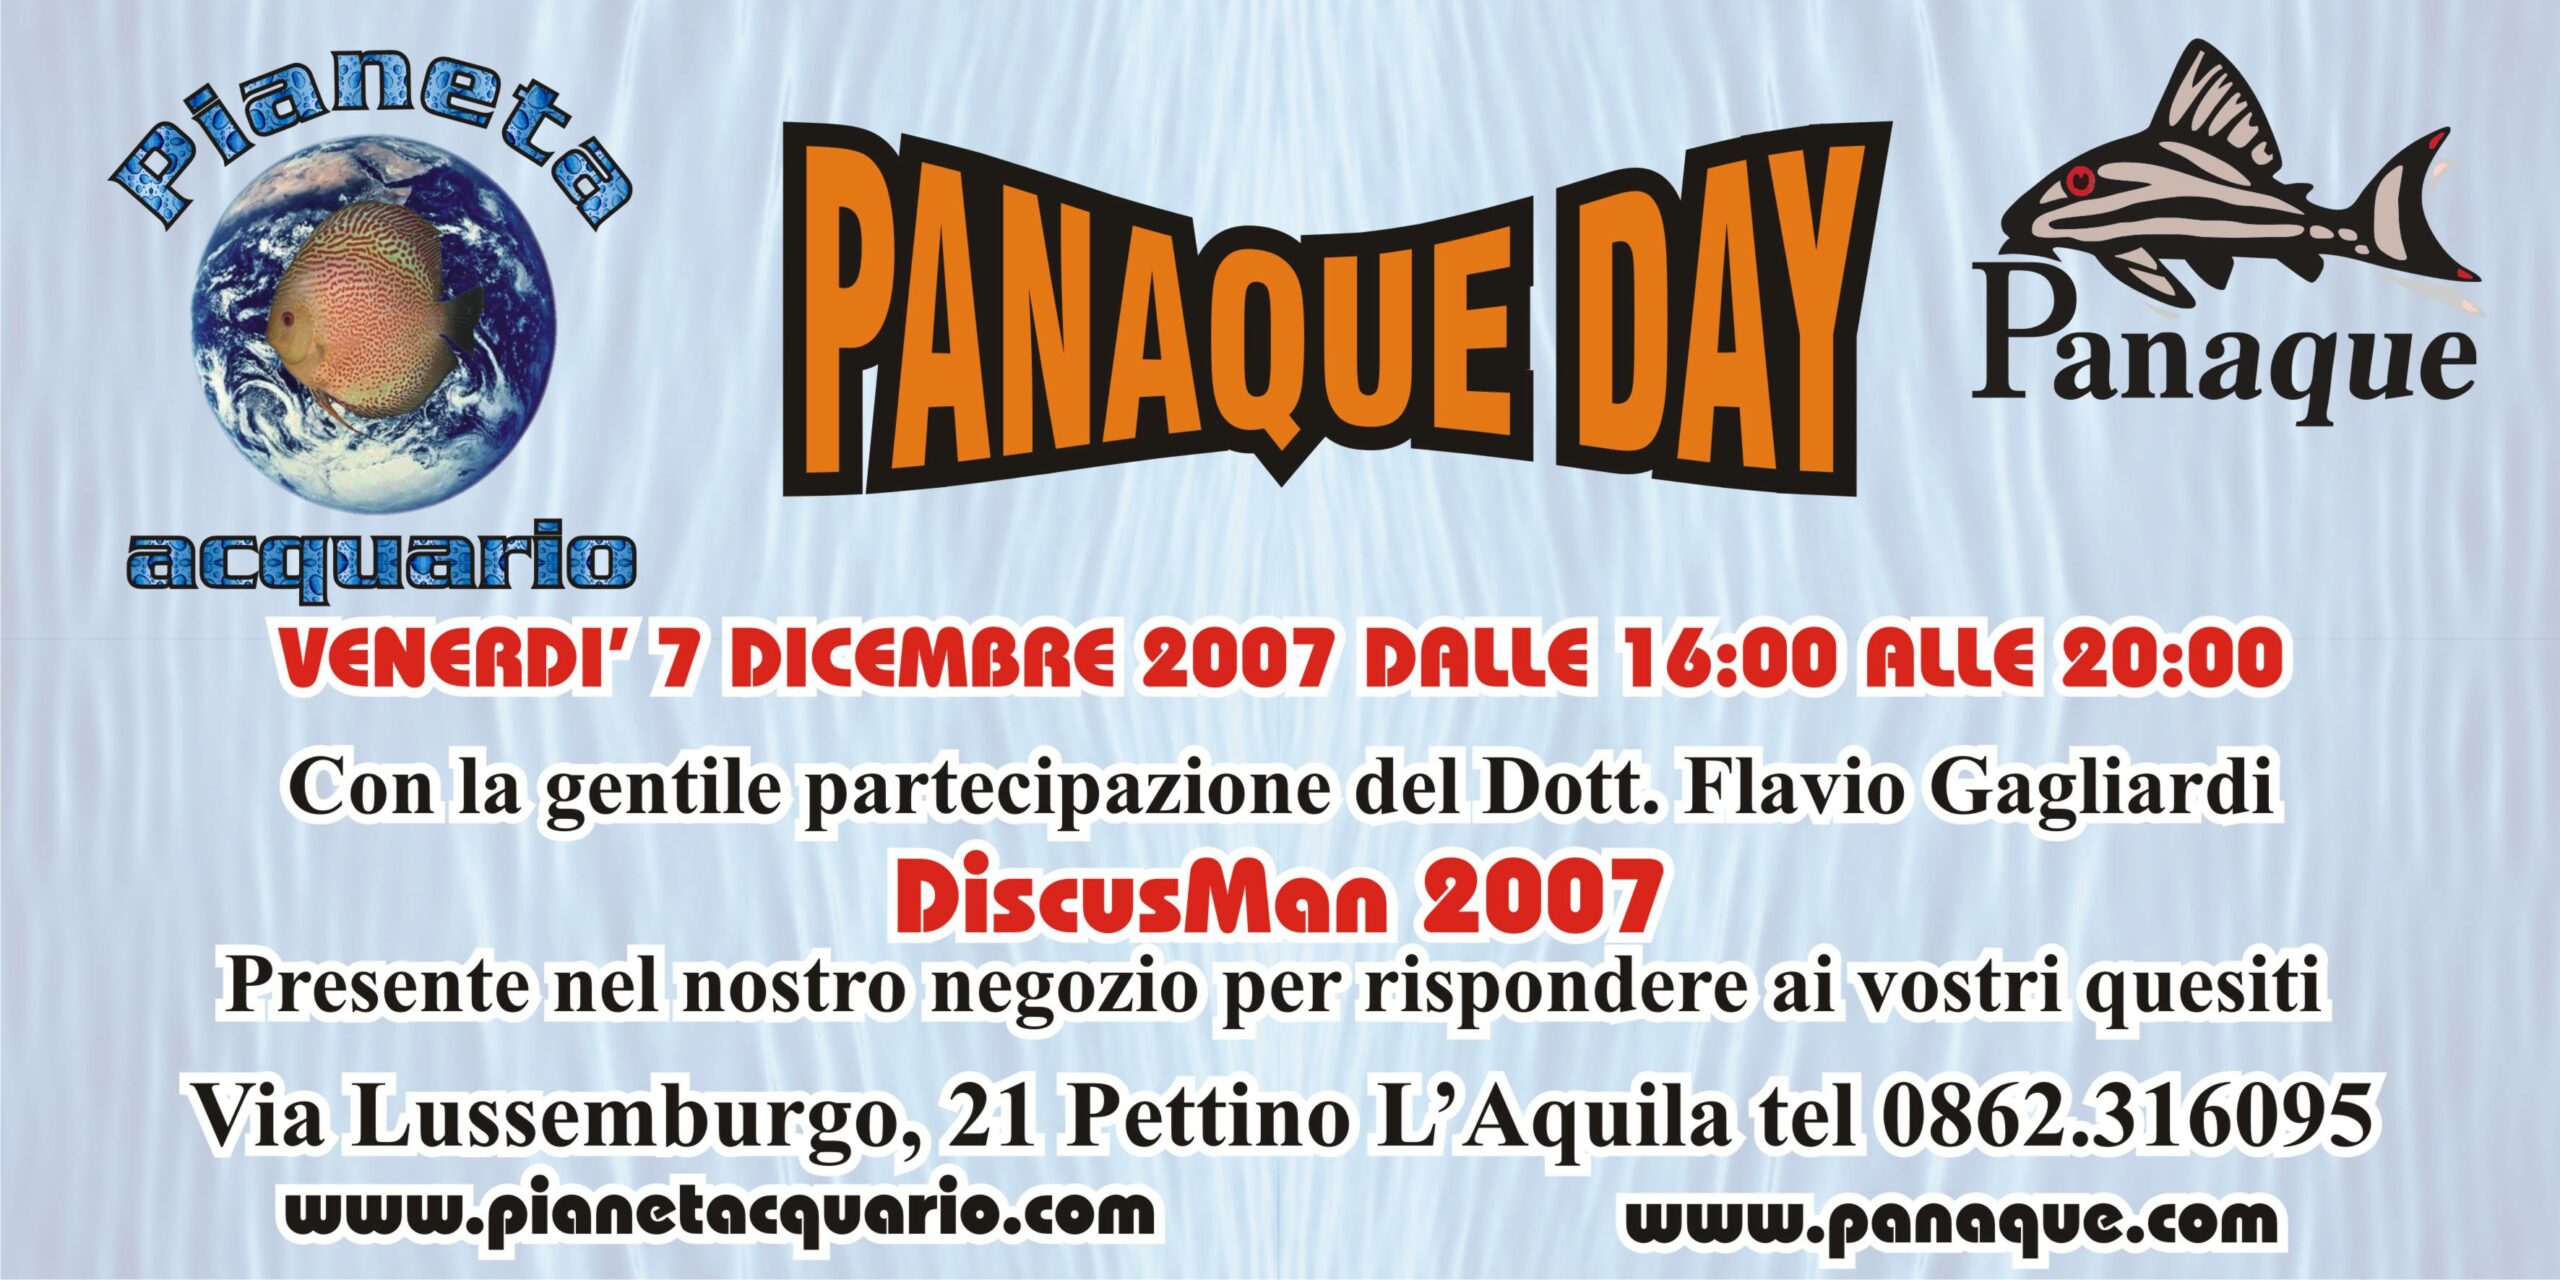 Panaque day